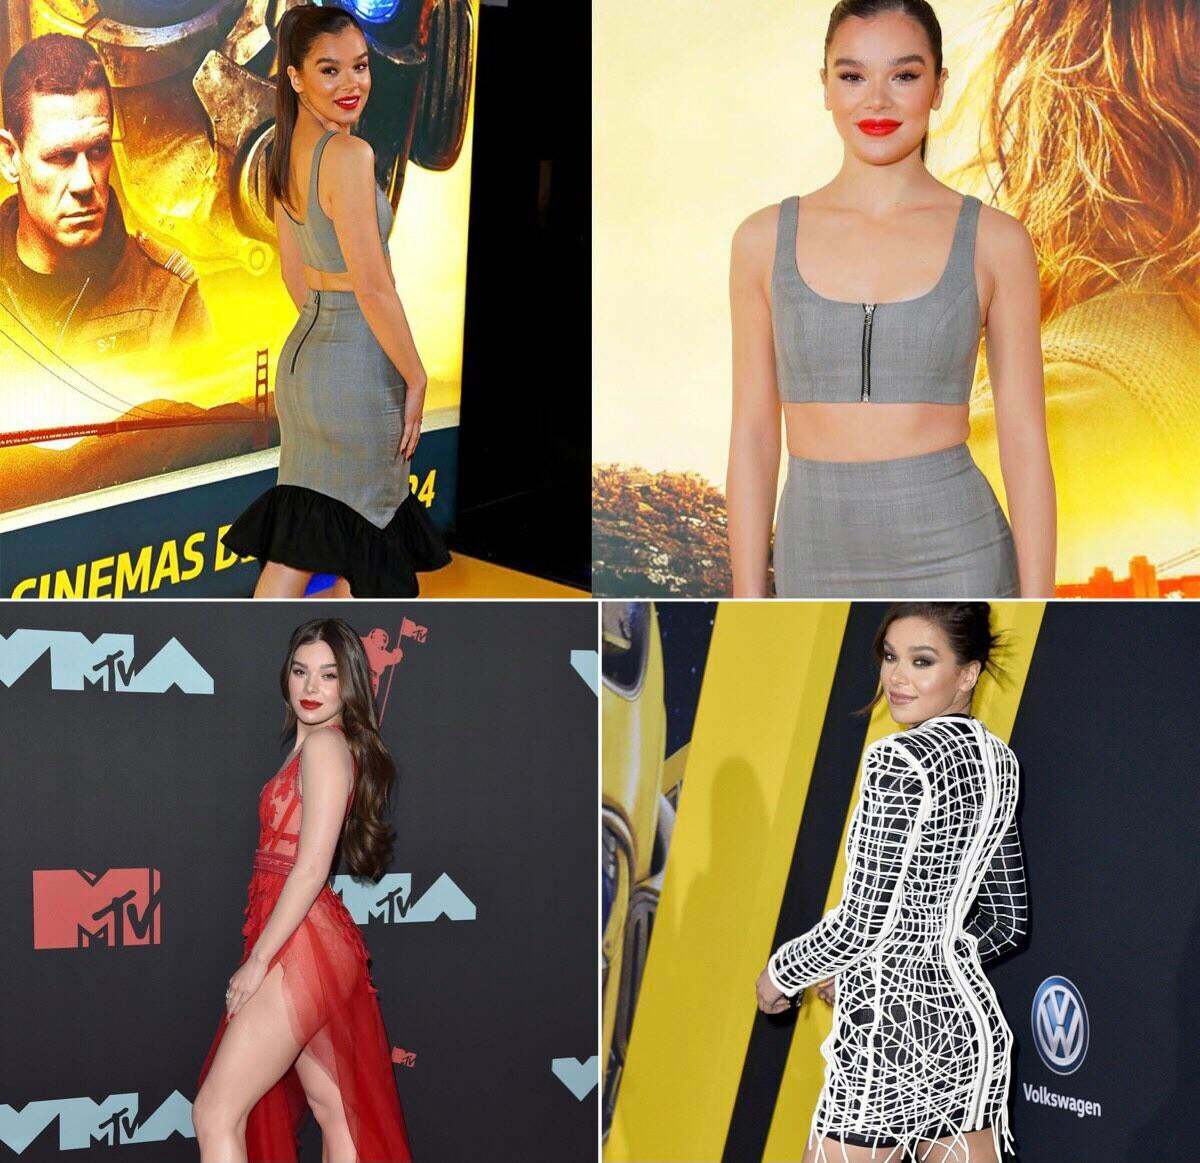 Which outfit are you choosing to fuck Hailee Steinfeld in? And how would yall fuck this goddess in the chosen outfit?